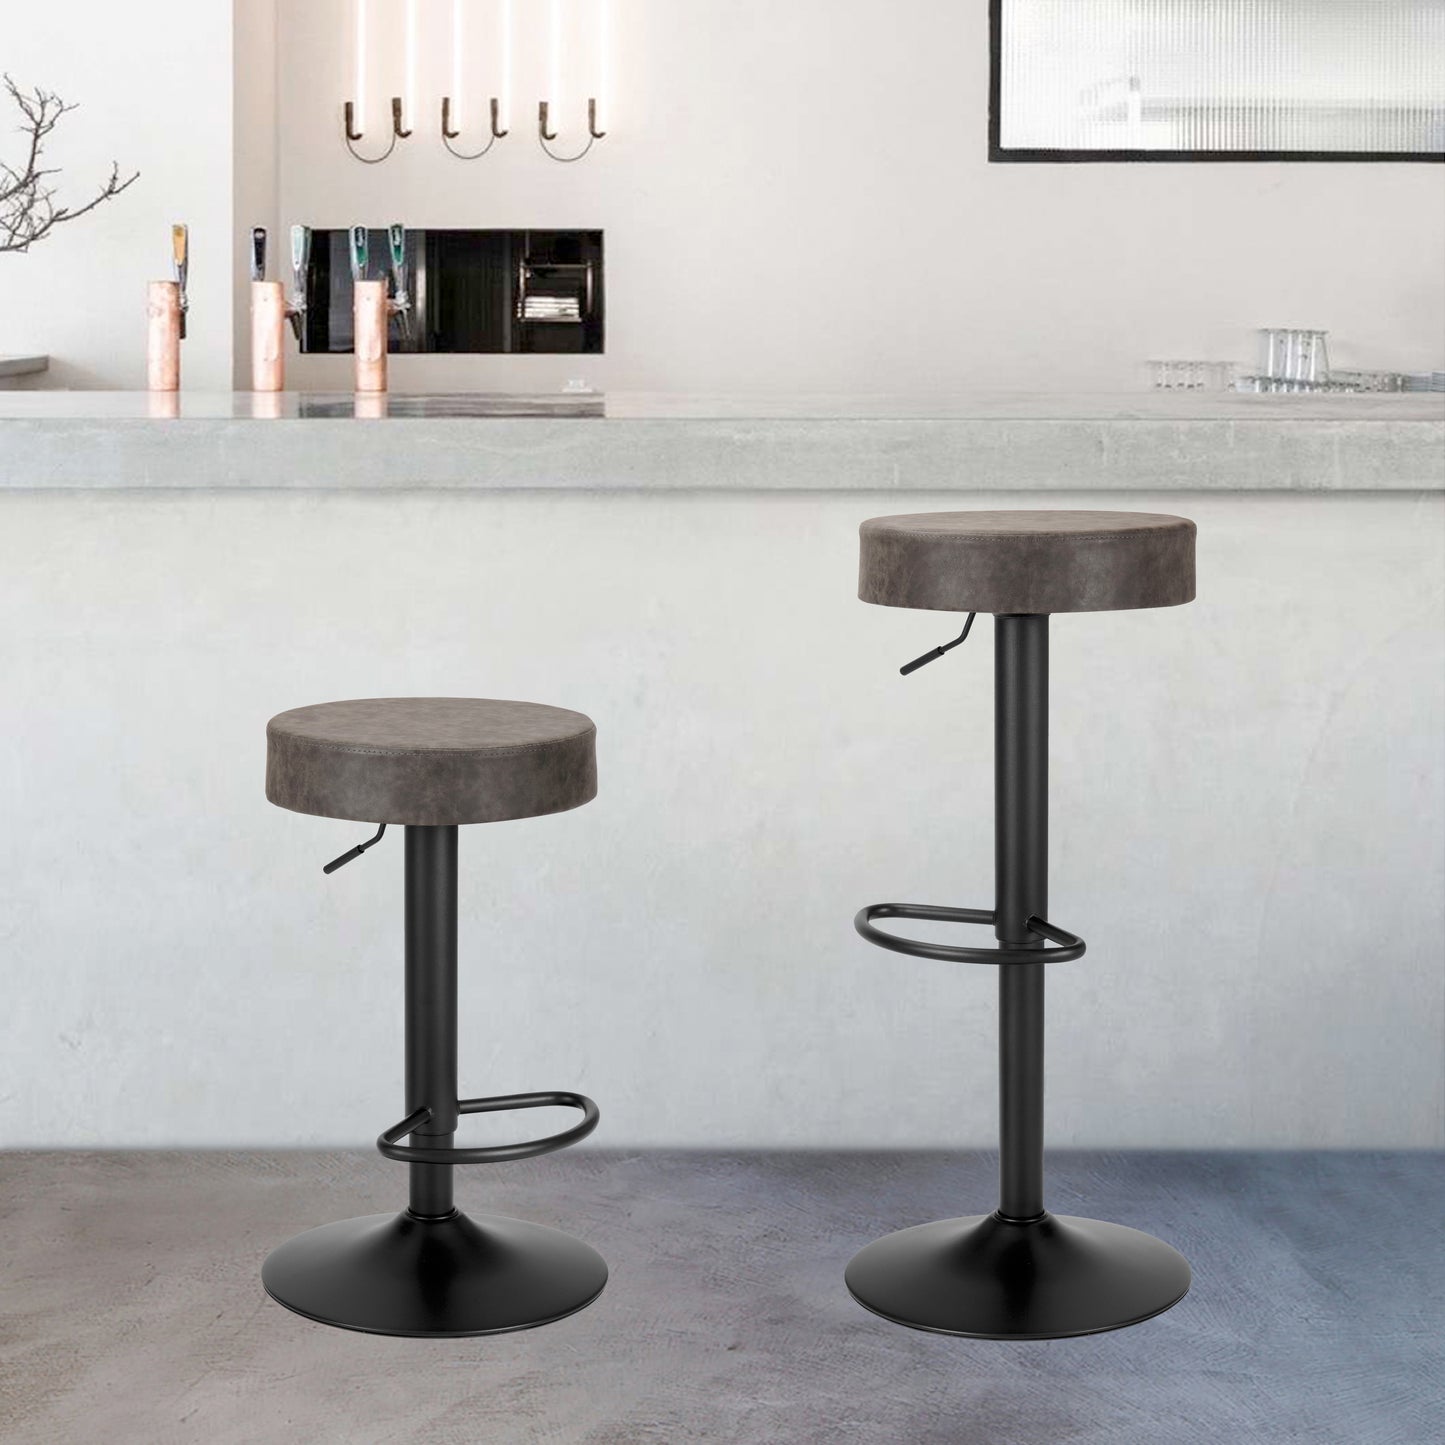 Finnhomy Bar Stools Set of 2 Counter Height, Swivel Barstools with Footrest and Backless Round, Height Adjustable Modern Bar stools for Kitchen, Vintage Leather, Retro Grey